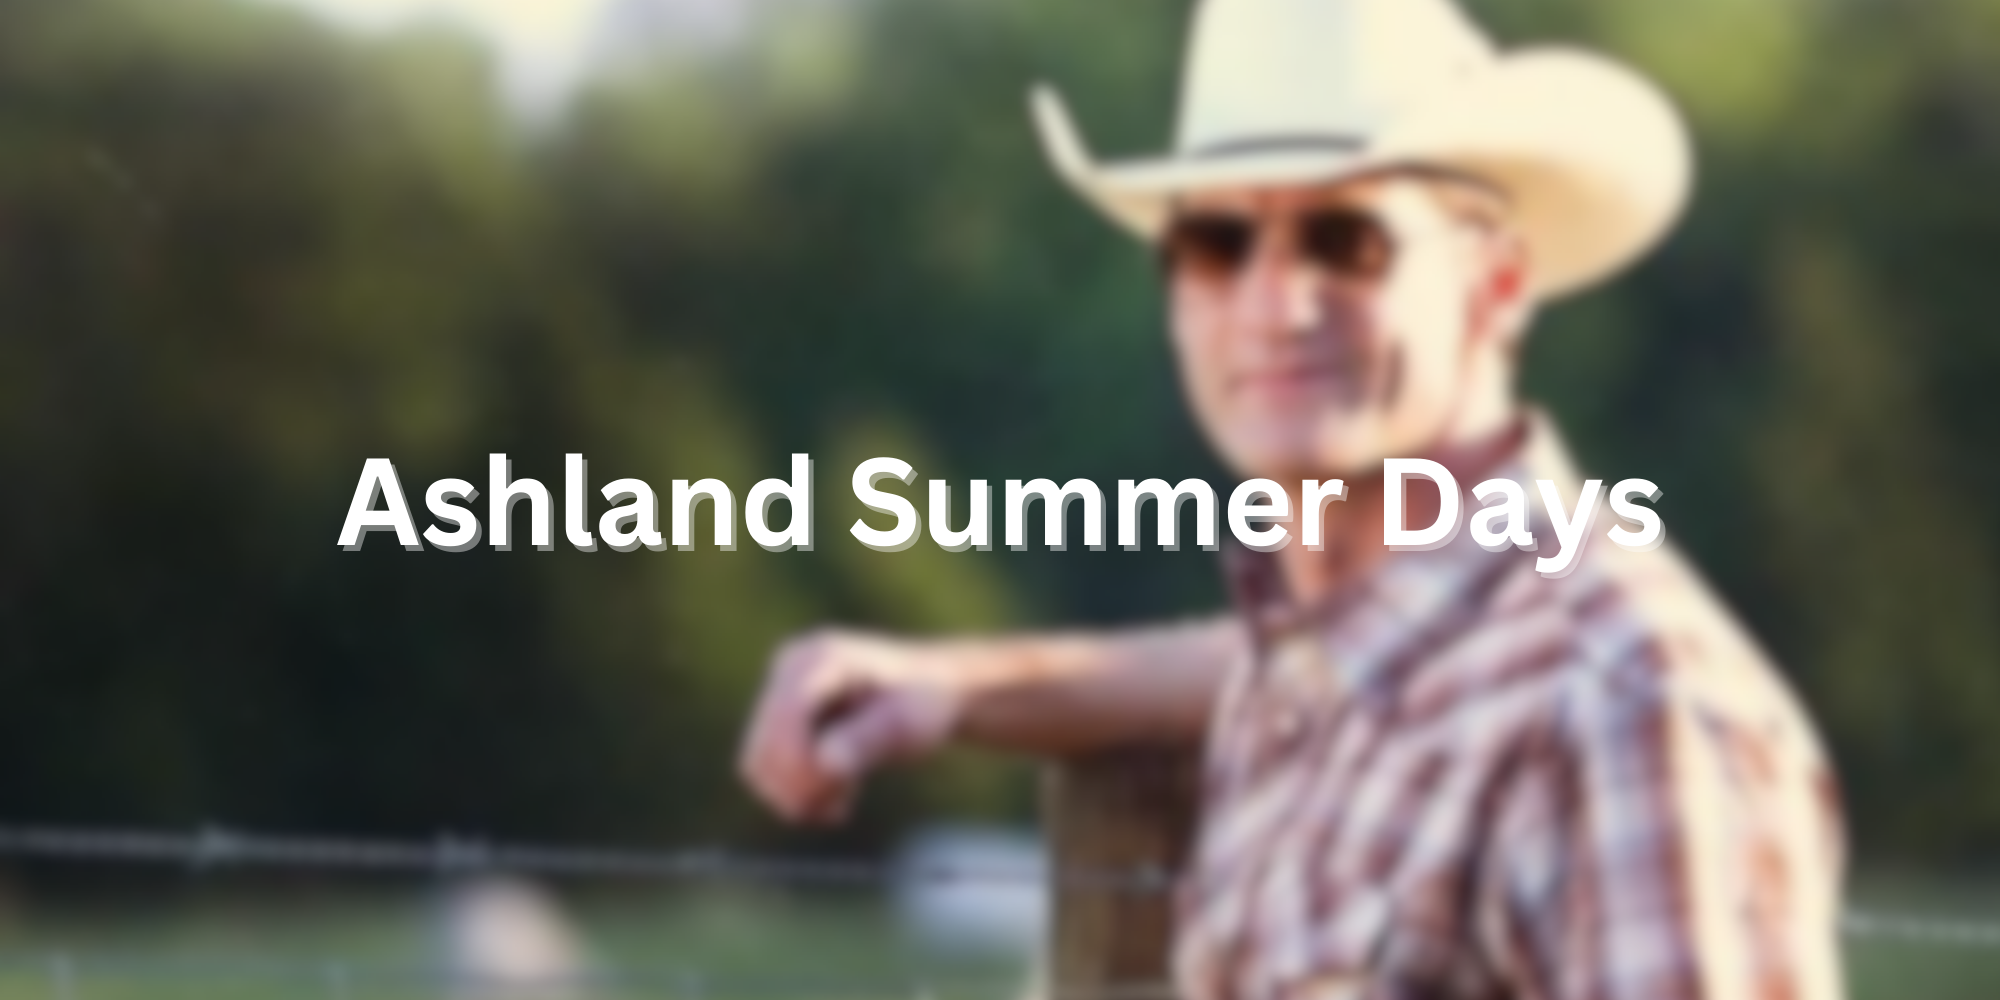 picture of blurred cowboy that says "ashland summer days"